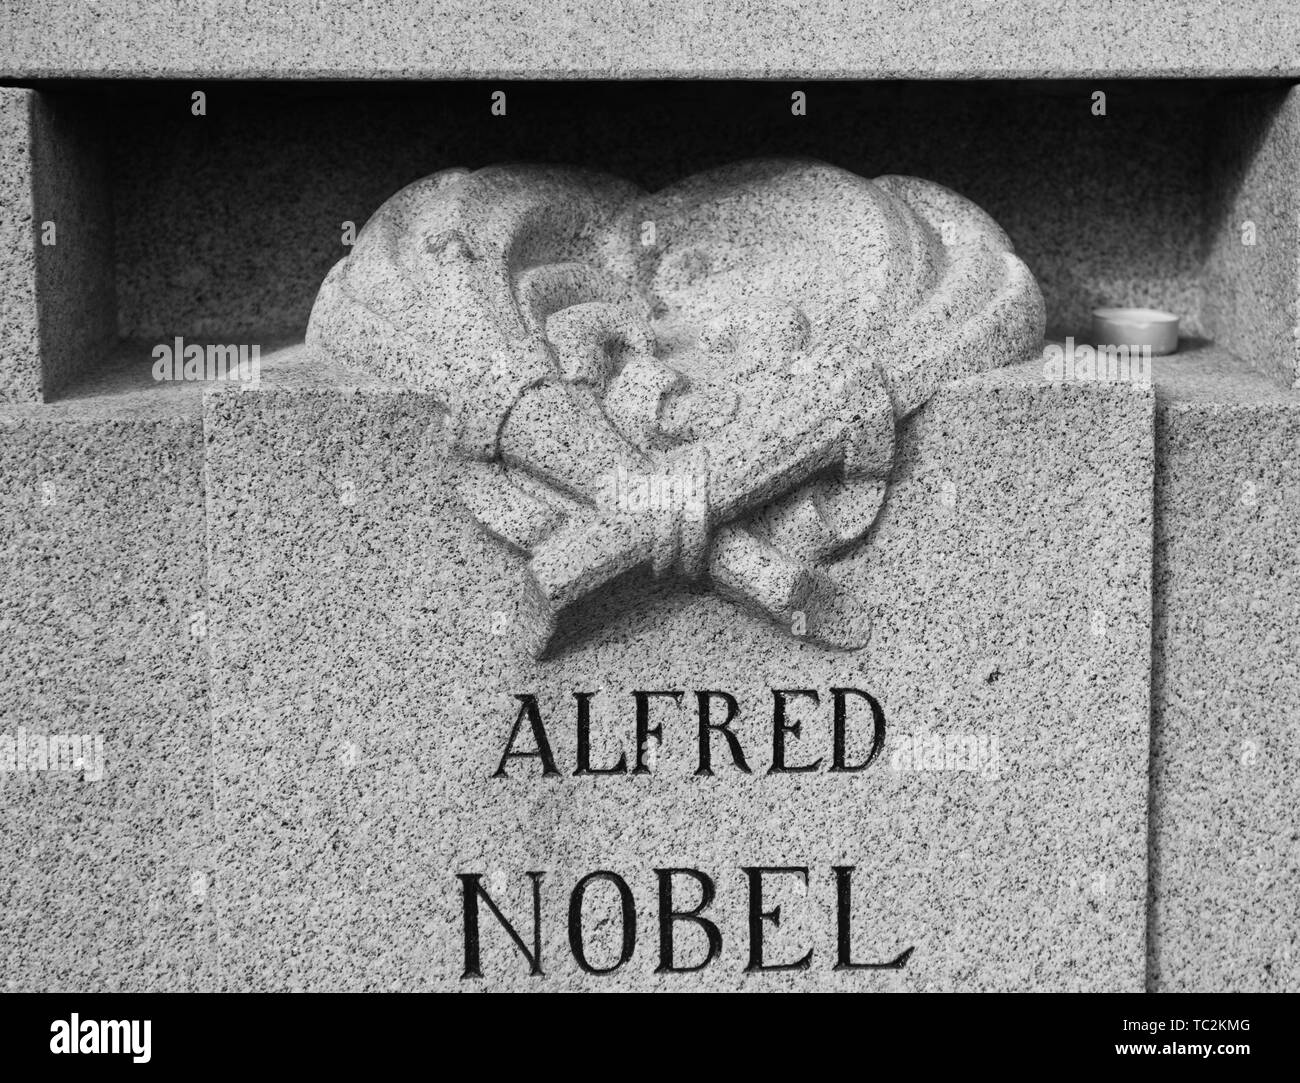 Cemeteries Black and White Stock Photos & Images - Alamy